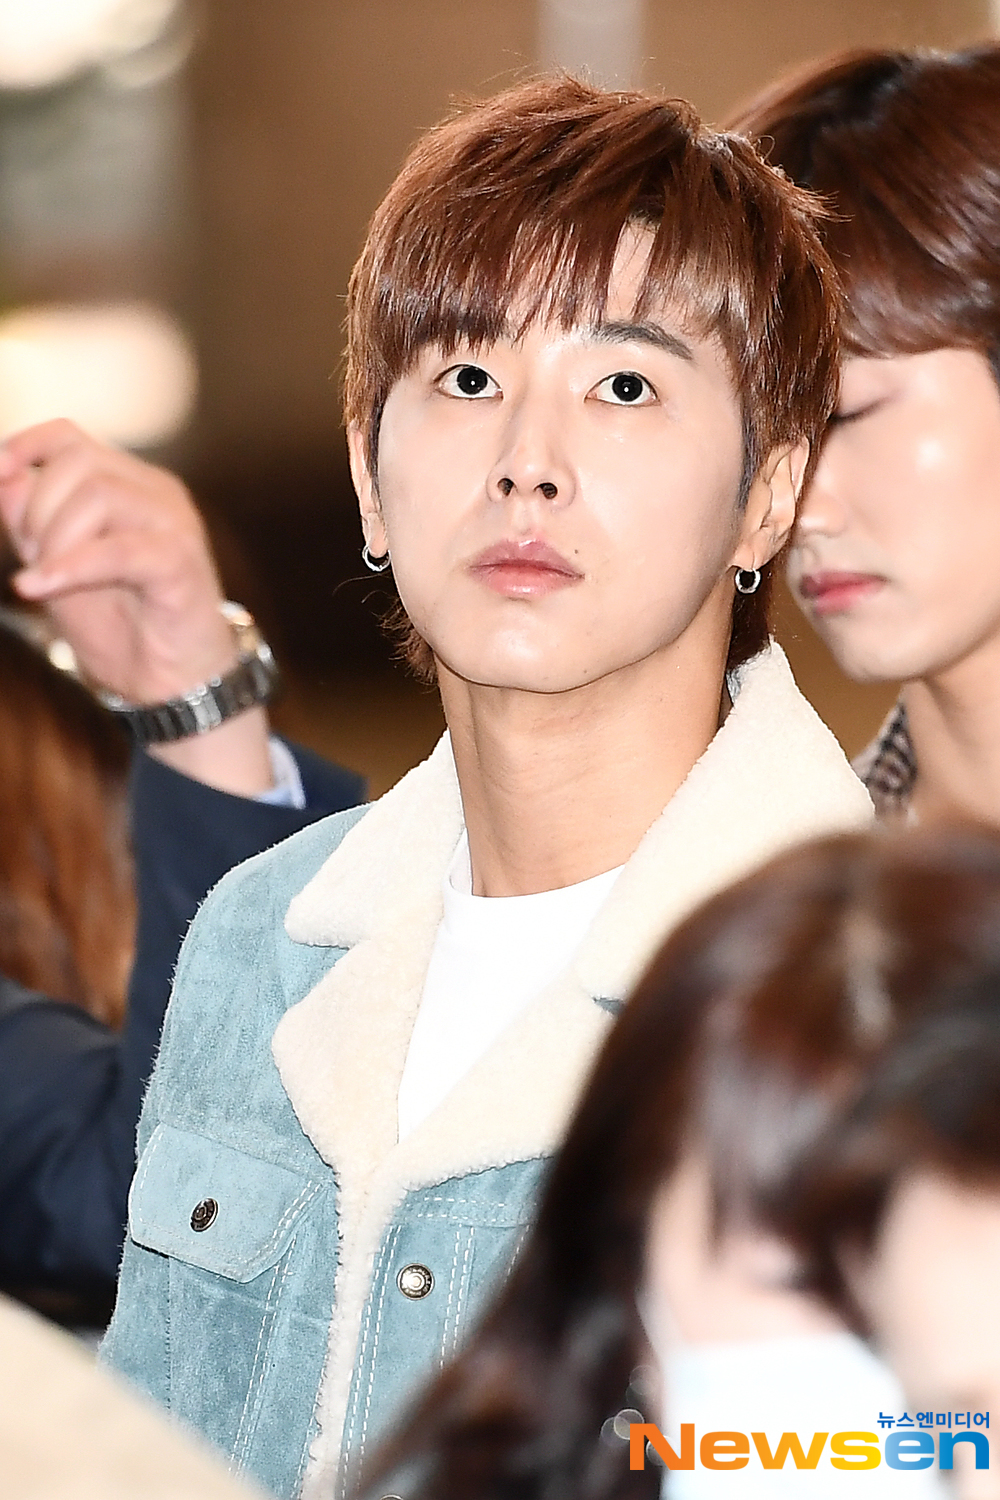 TVXQ members U-Know Yunho and Choi Chang-min departed for Tokyo Haneda on April 1 at Gimpo International Airport in Banghwa-dong, Gangseo-gu, Seoul to attend the Tohoshinki Fanclub Event 2019 TOHOSHINKI The GARDEN schedule.TVXQ member U-Know Yunho is leaving for Haneda, Tokyo.exponential earthquake